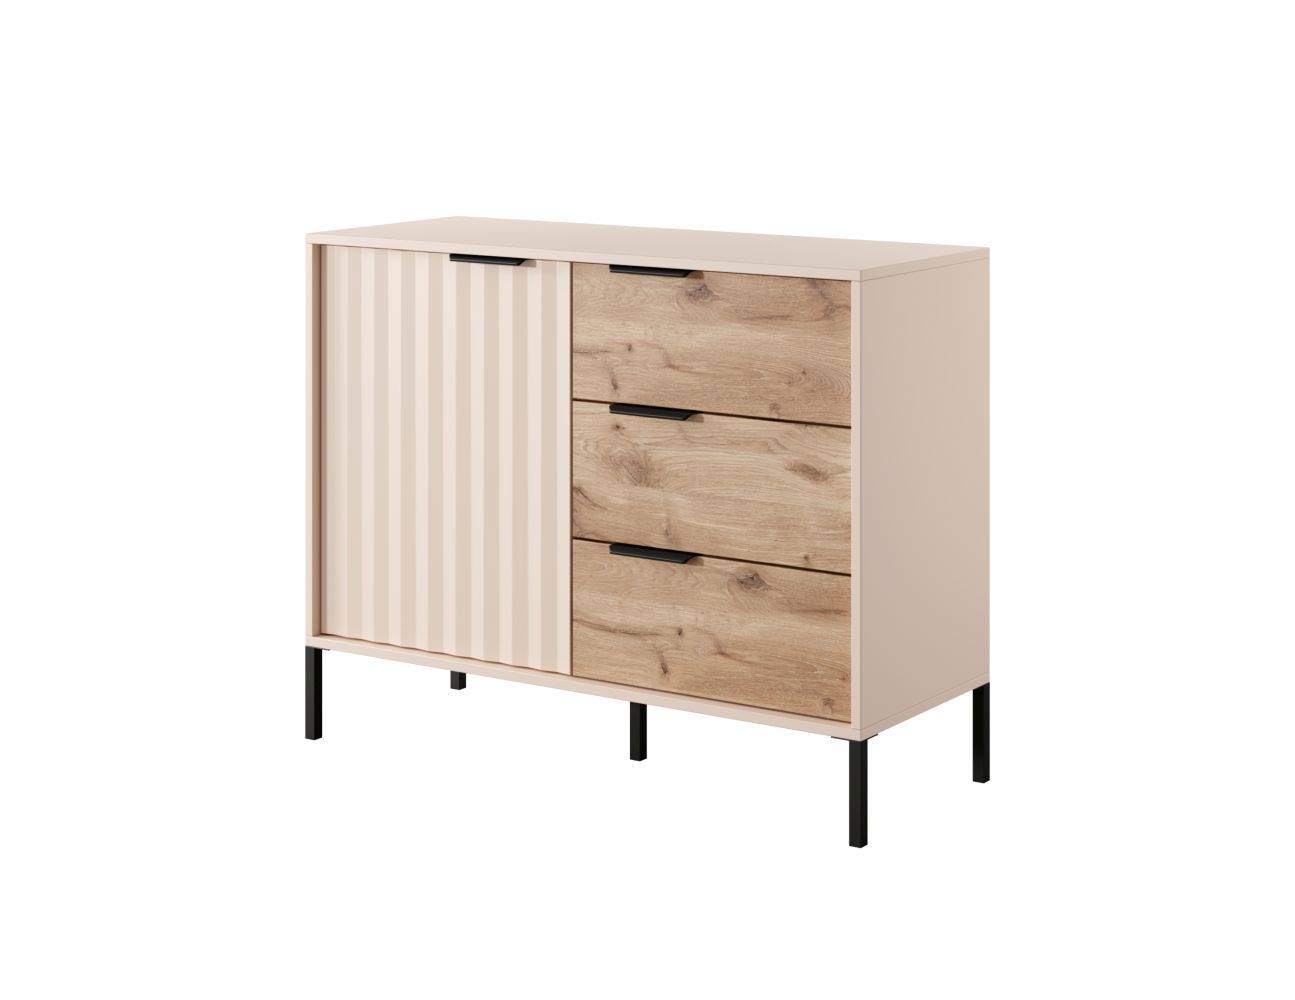 Narrow chest of drawers Fouchana 04, color: Beige / Oak Viking - Dimensions: 81 x 103 x 39.5 cm (H x W x D), with three drawers